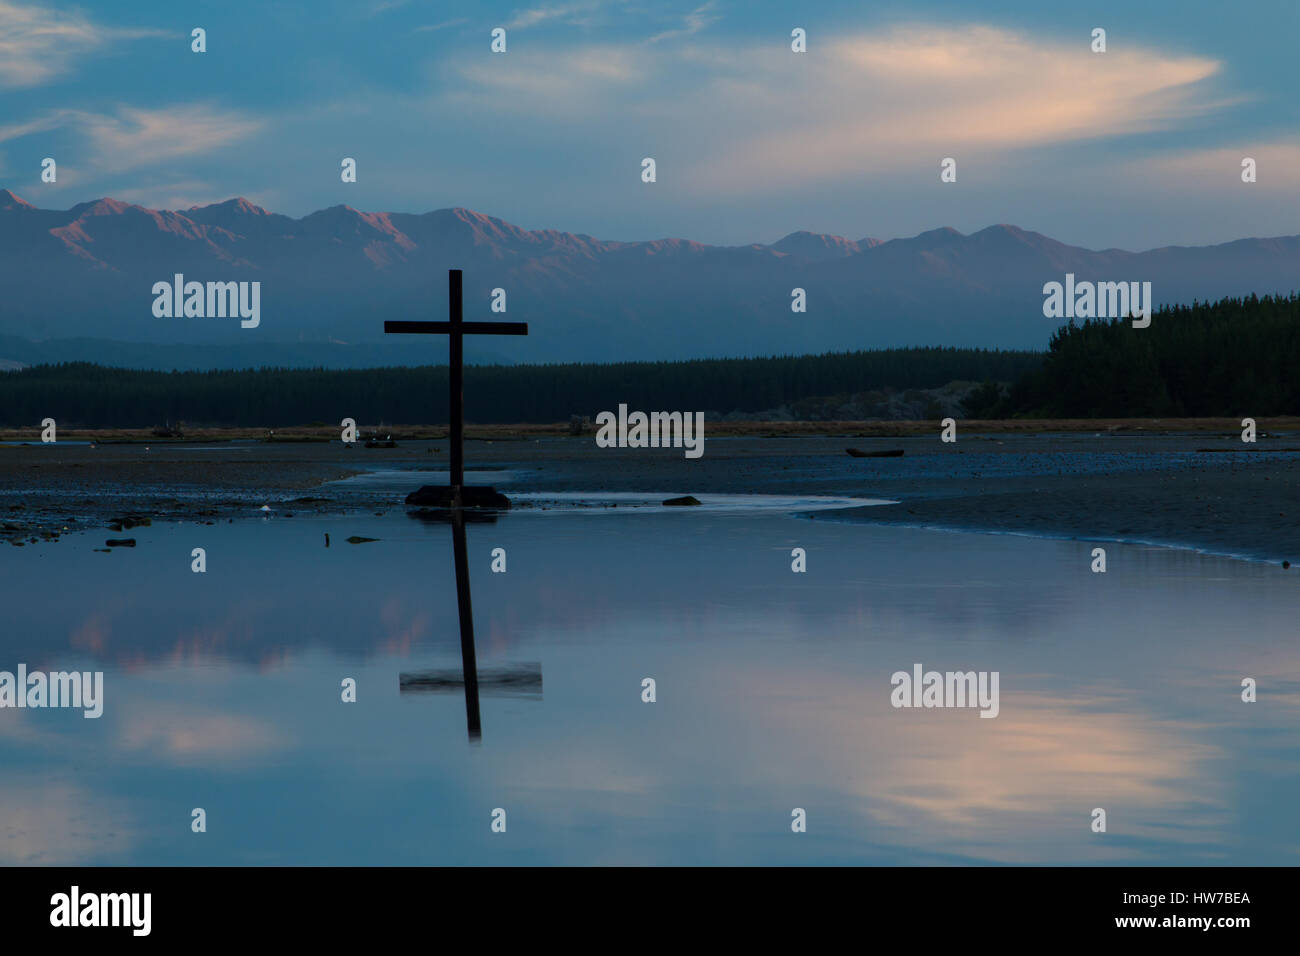 Dark cross in a drying up river way. With some mountain ranges in the background. Stock Photo